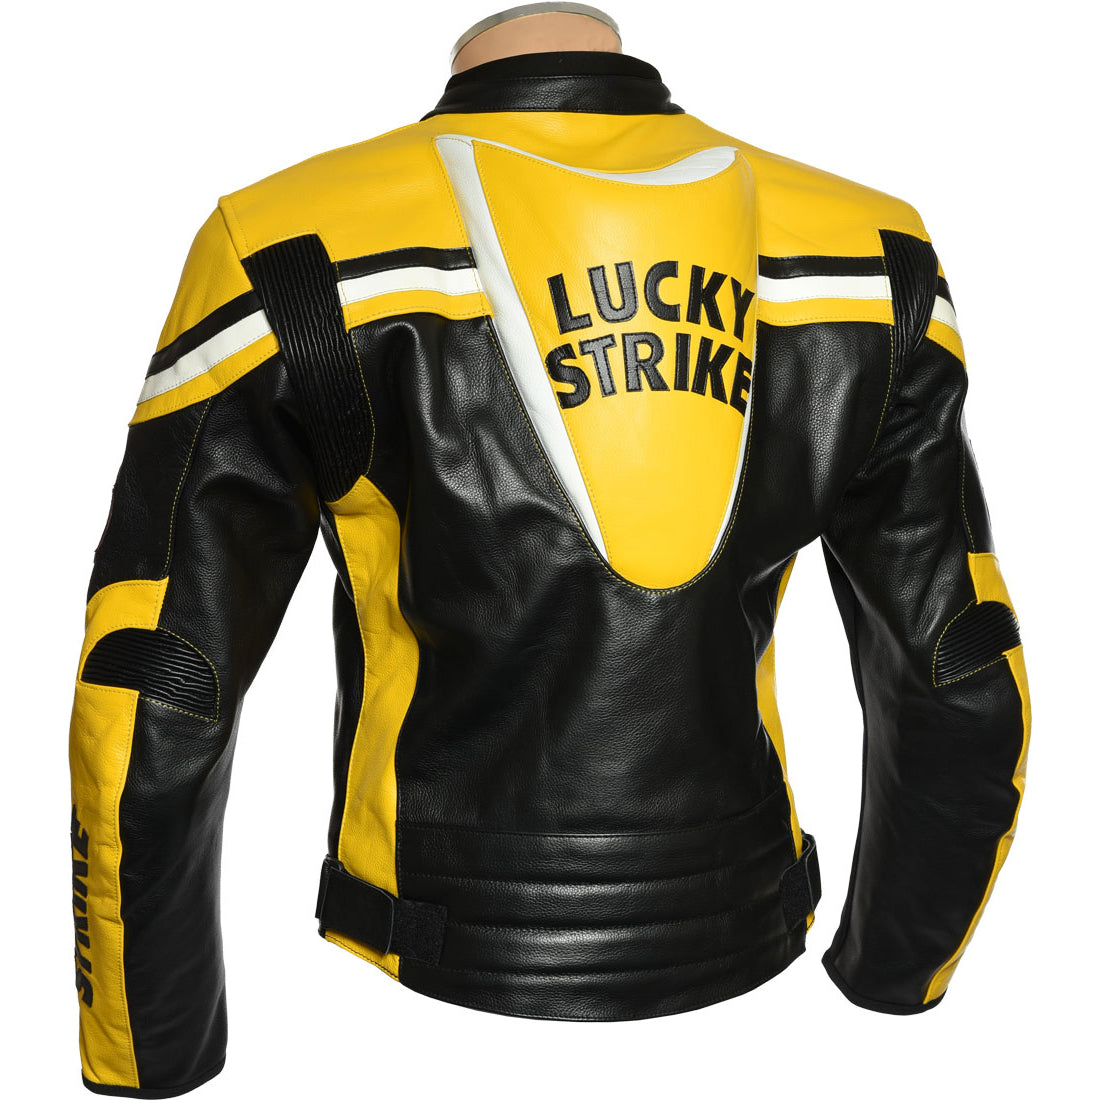 Lucky Strike Yellow & Black Leather Motorcycle Jacket